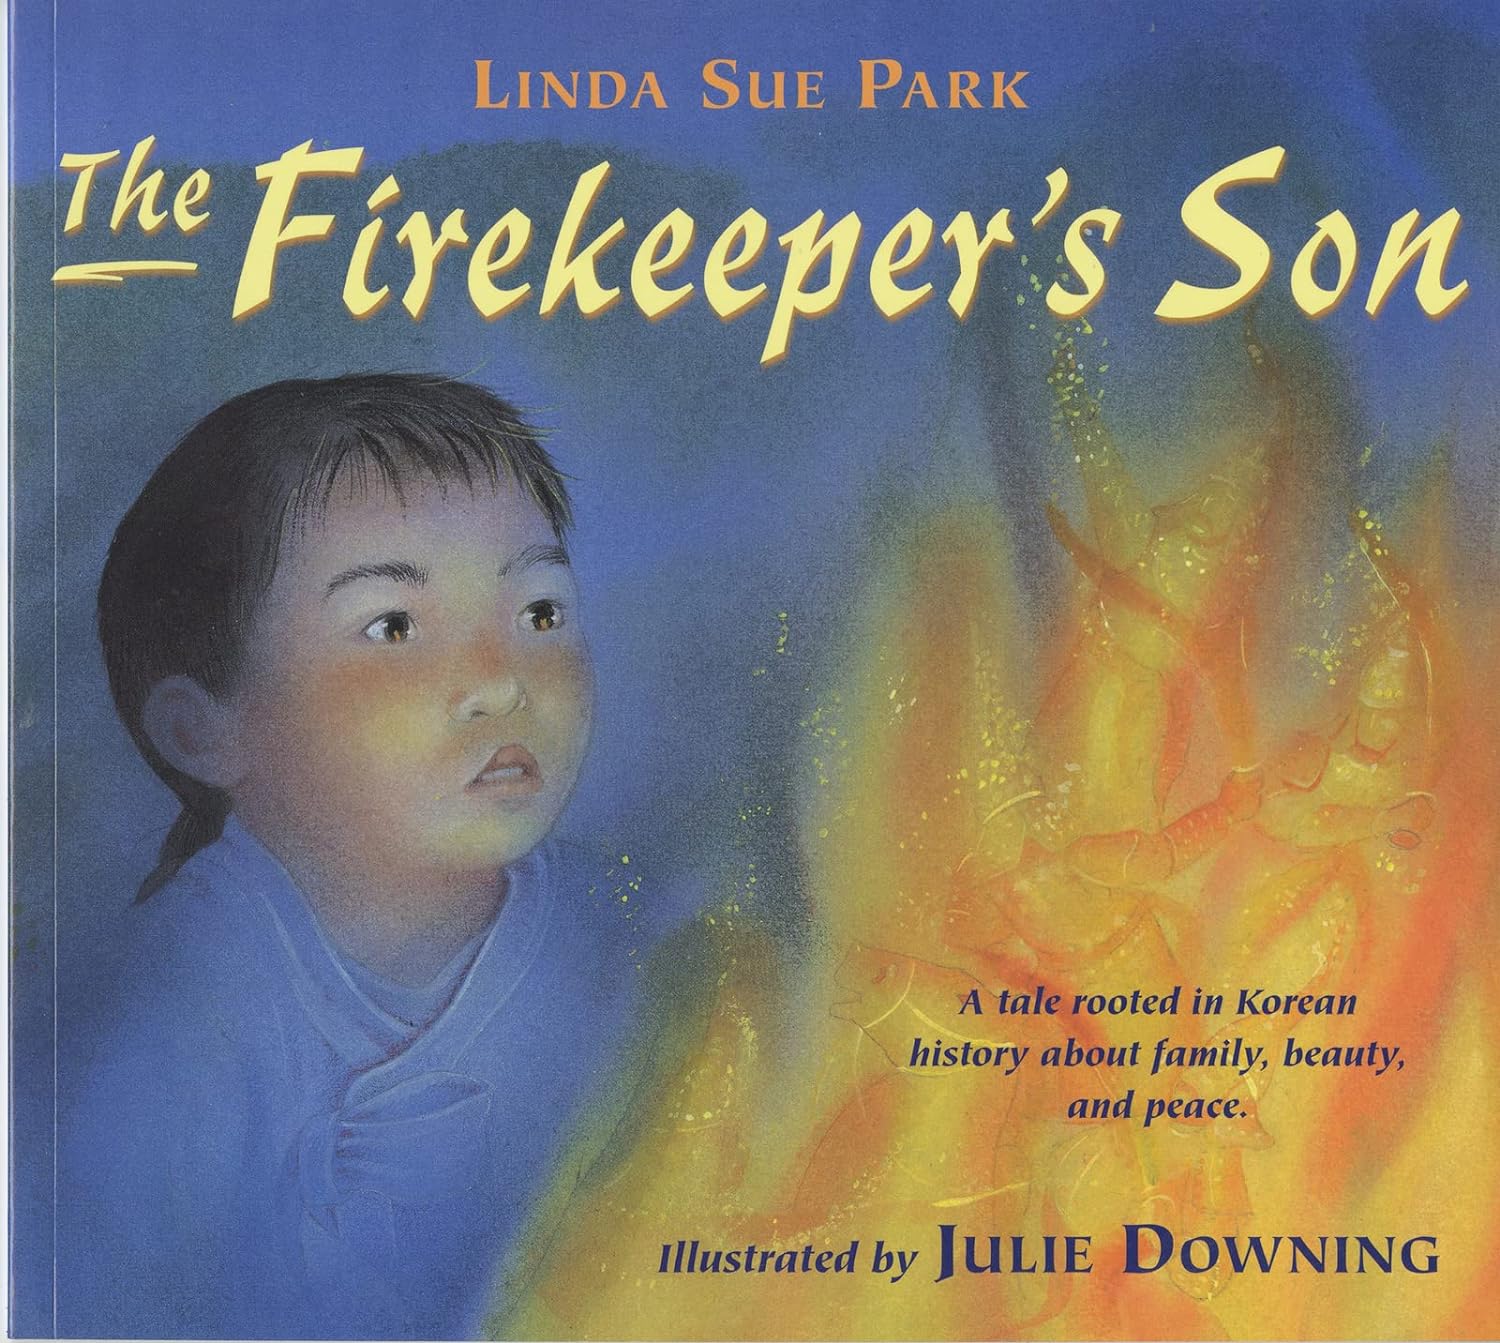 The Firekeeper’s Son children's book about Korean history